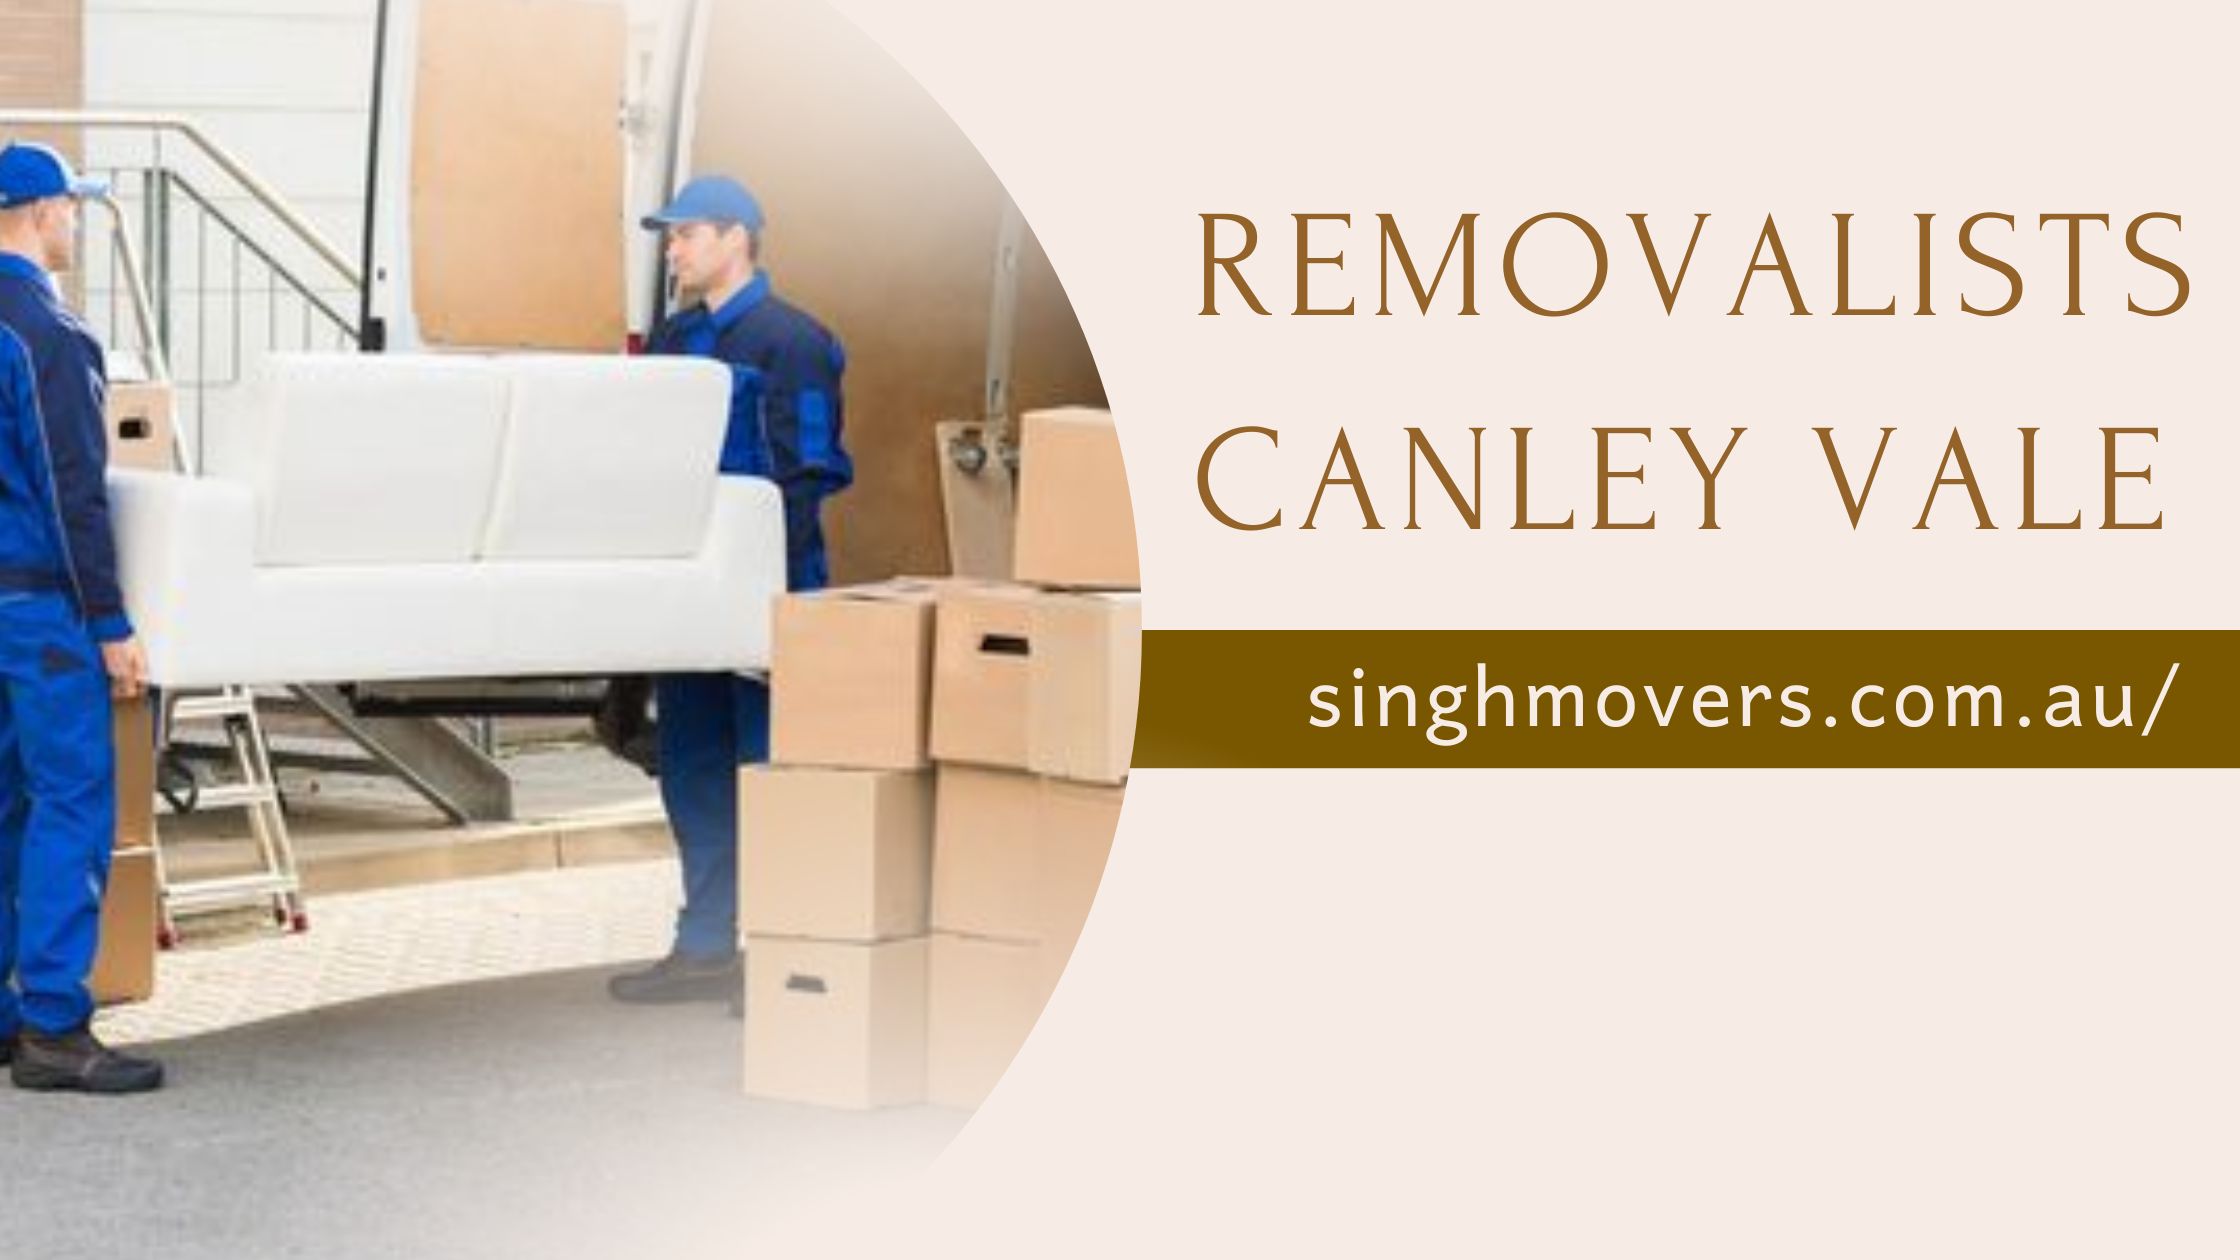 Removalists Canley Vale